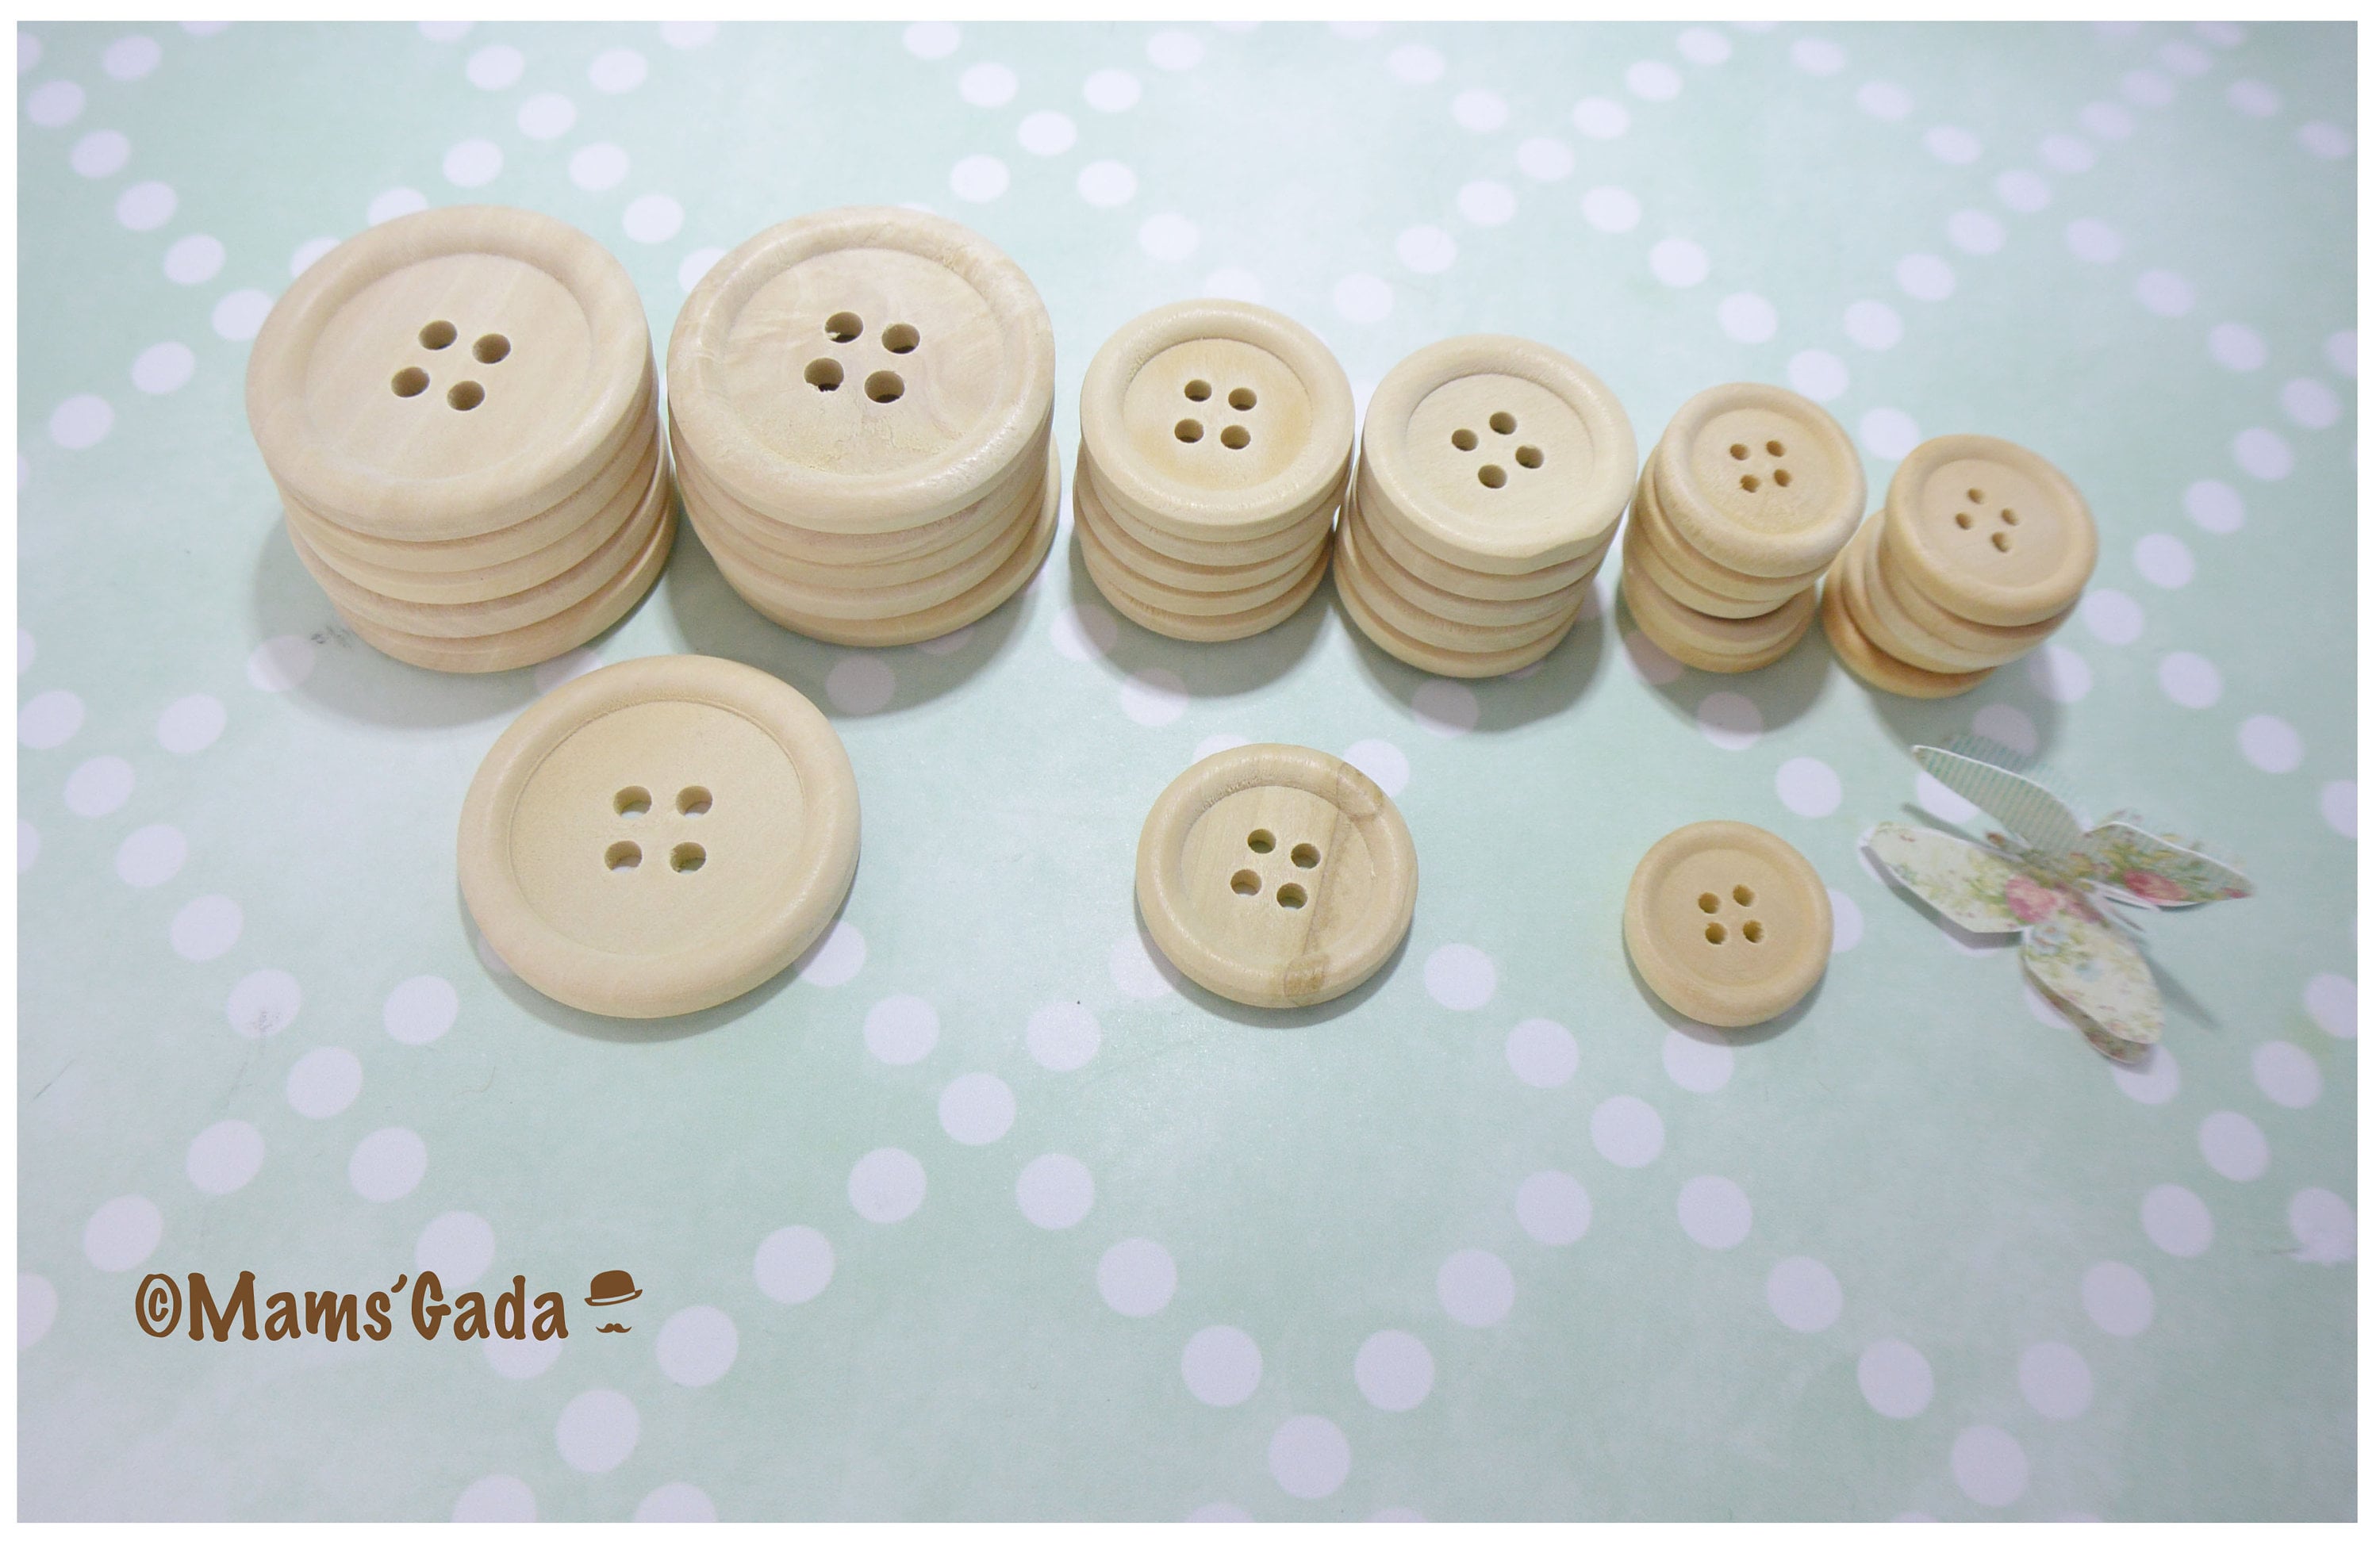 200pcs 30mm Multi Colors Round Big plastic Buttons 4 holes wholesale free  shipping large buttons edged - AliExpress